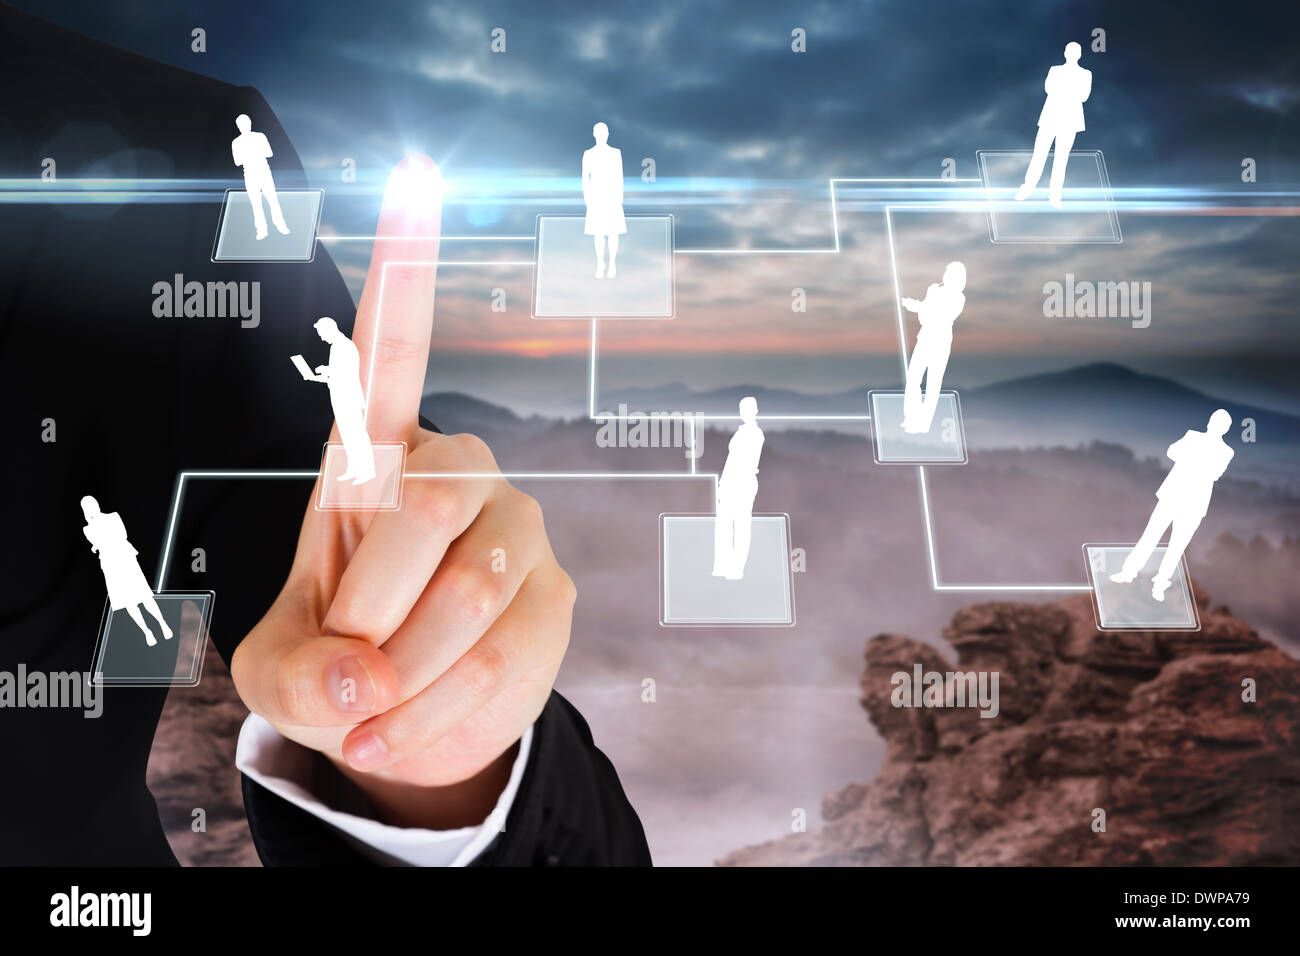 Finger pointing to business people graphic Stock Photo